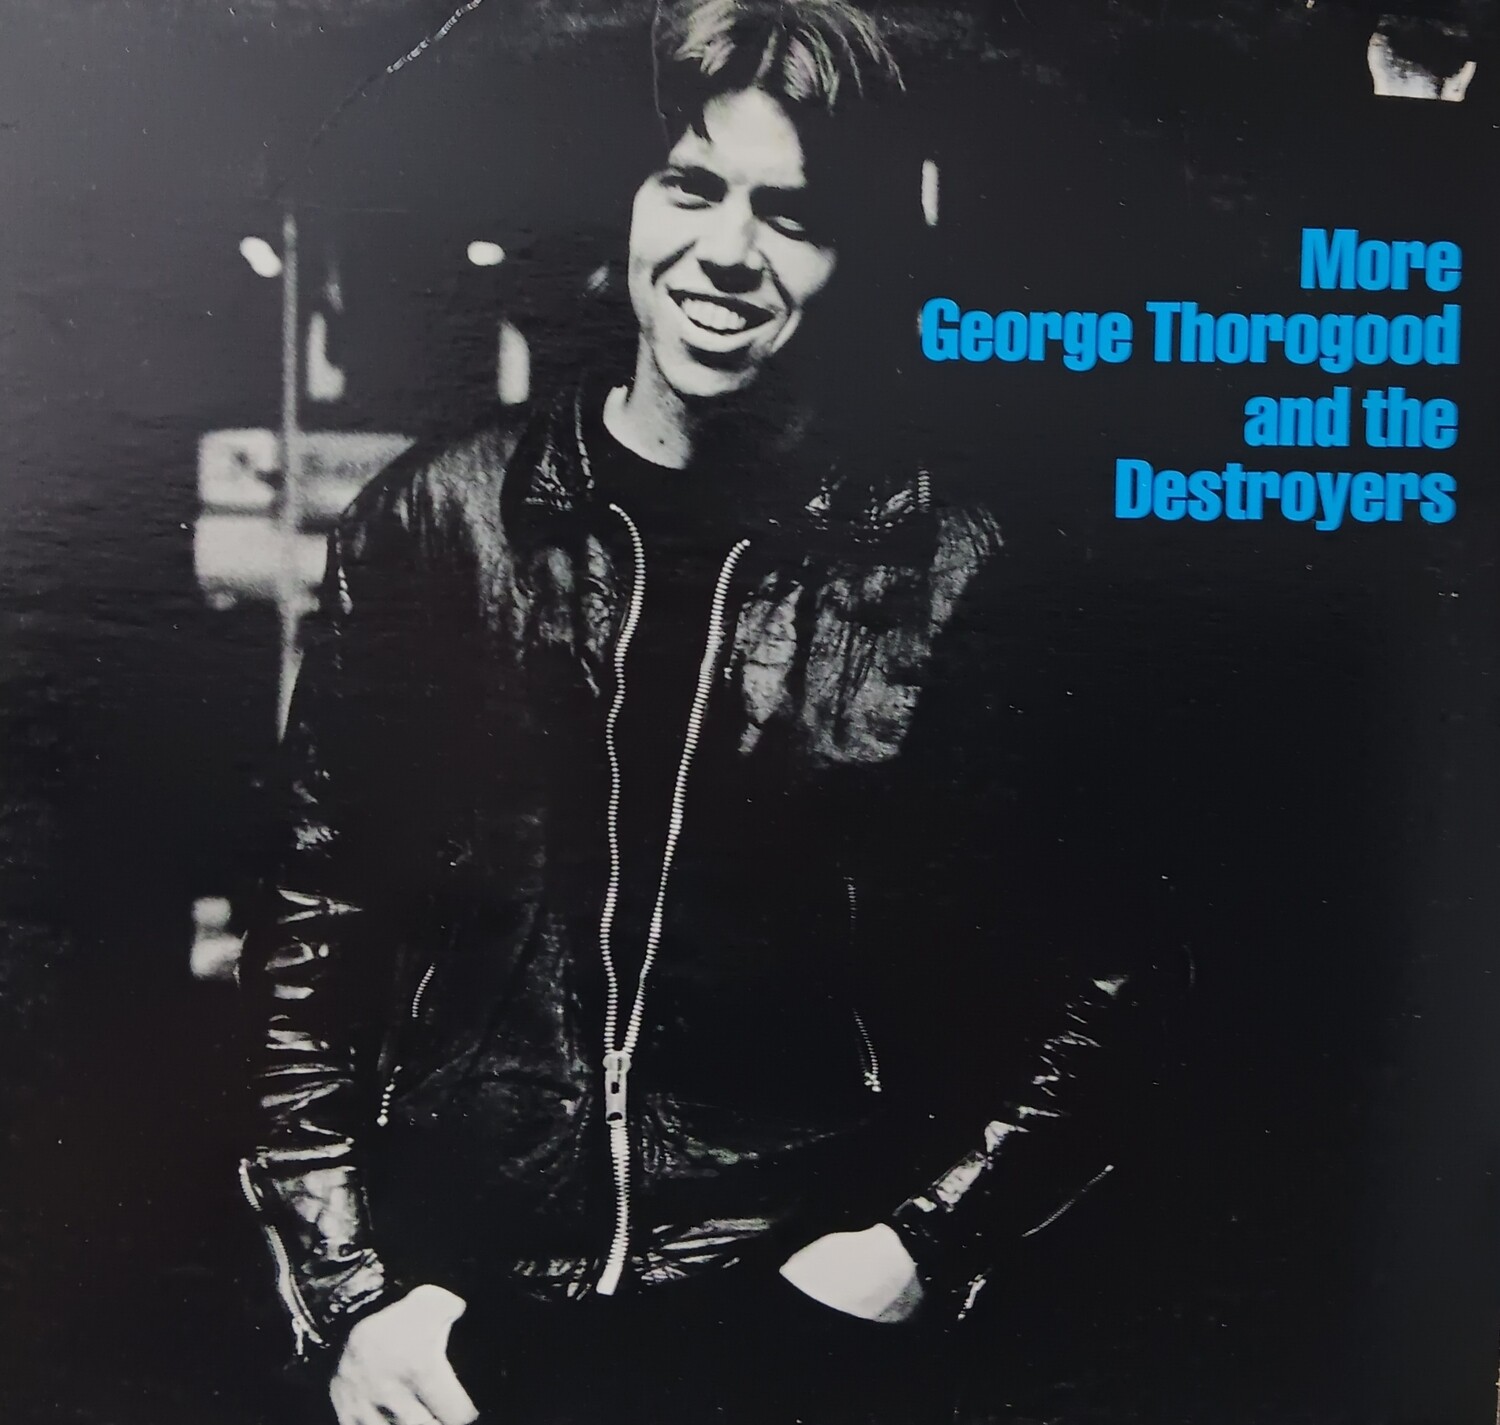 GEORGE THIROGOOD AND THE DESTROYERS - MORE GEORGE THOROGOOD AND THE DESTROYERS